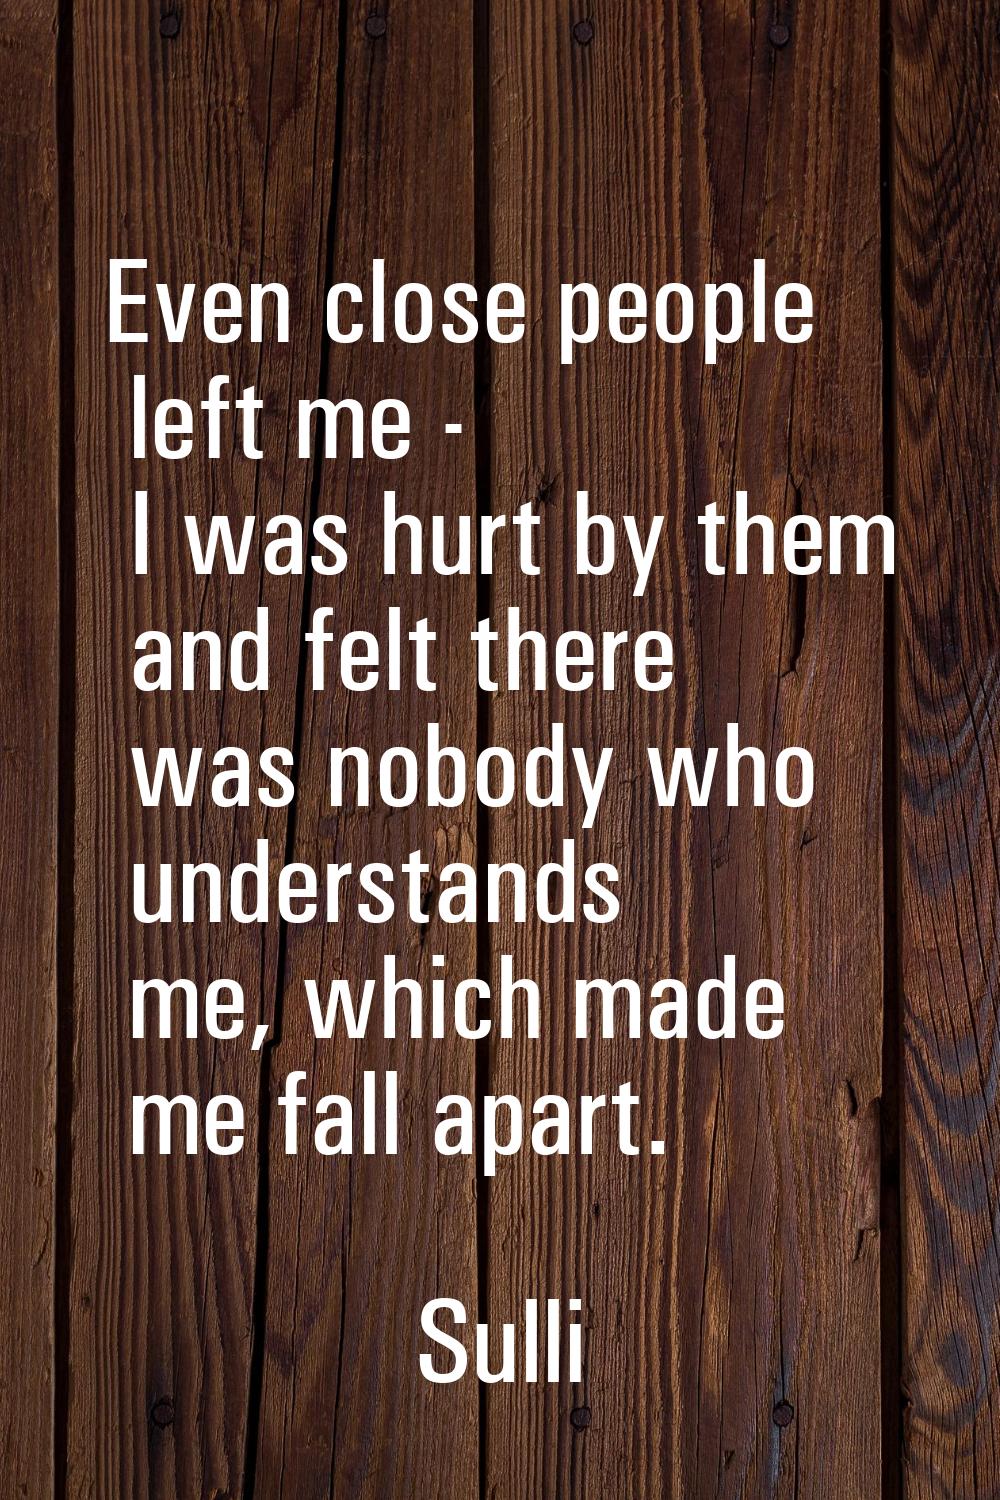 Even close people left me - I was hurt by them and felt there was nobody who understands me, which 